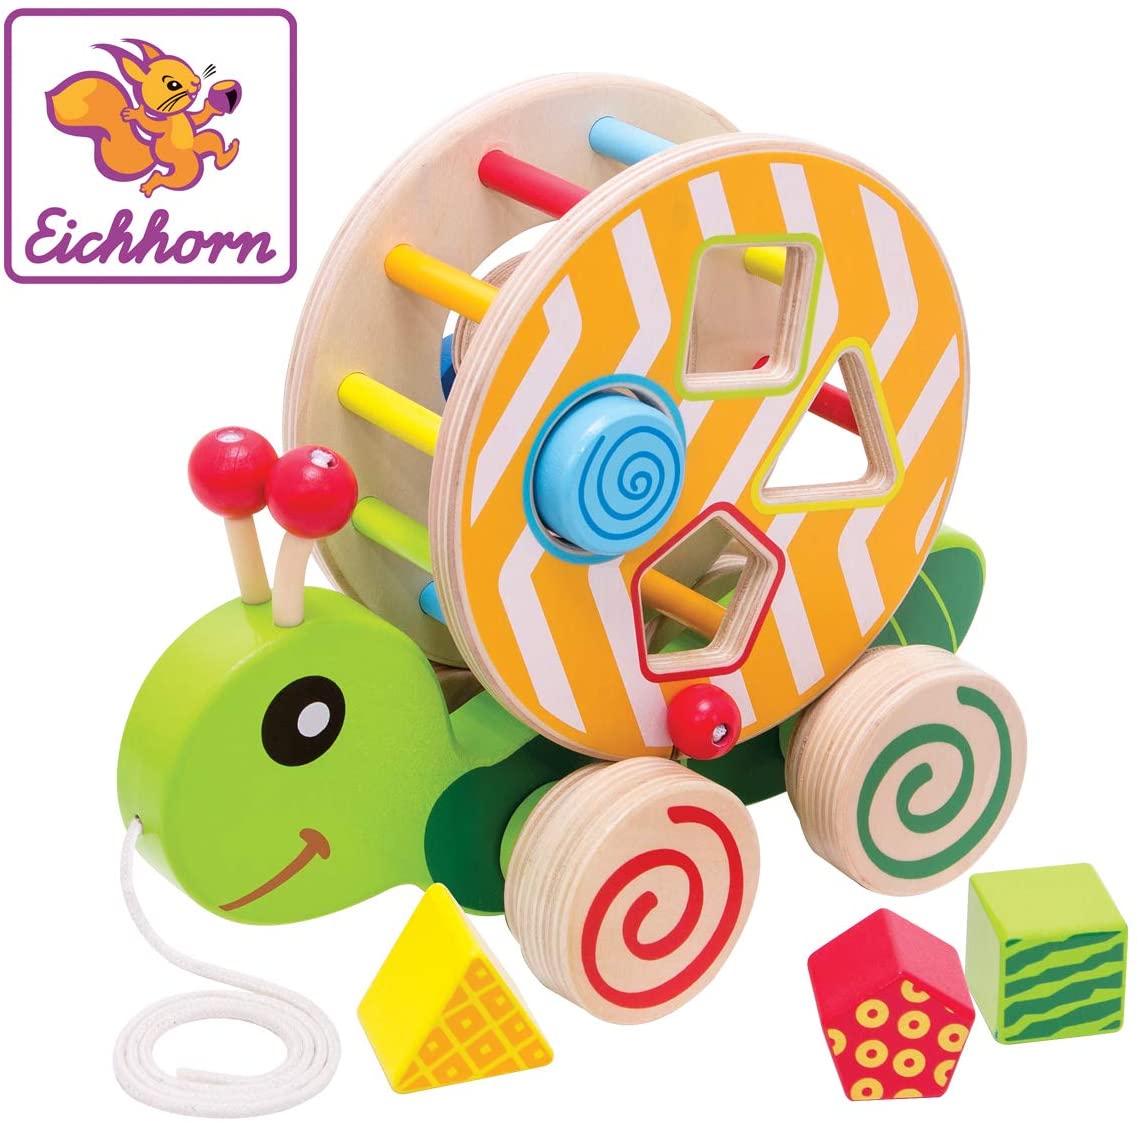 Eichhorn Pull-on Animal, with 4 different Birch wood Building Blocks for Children Aged 1 and up. Size: 15 x 24 x 19.5 cm